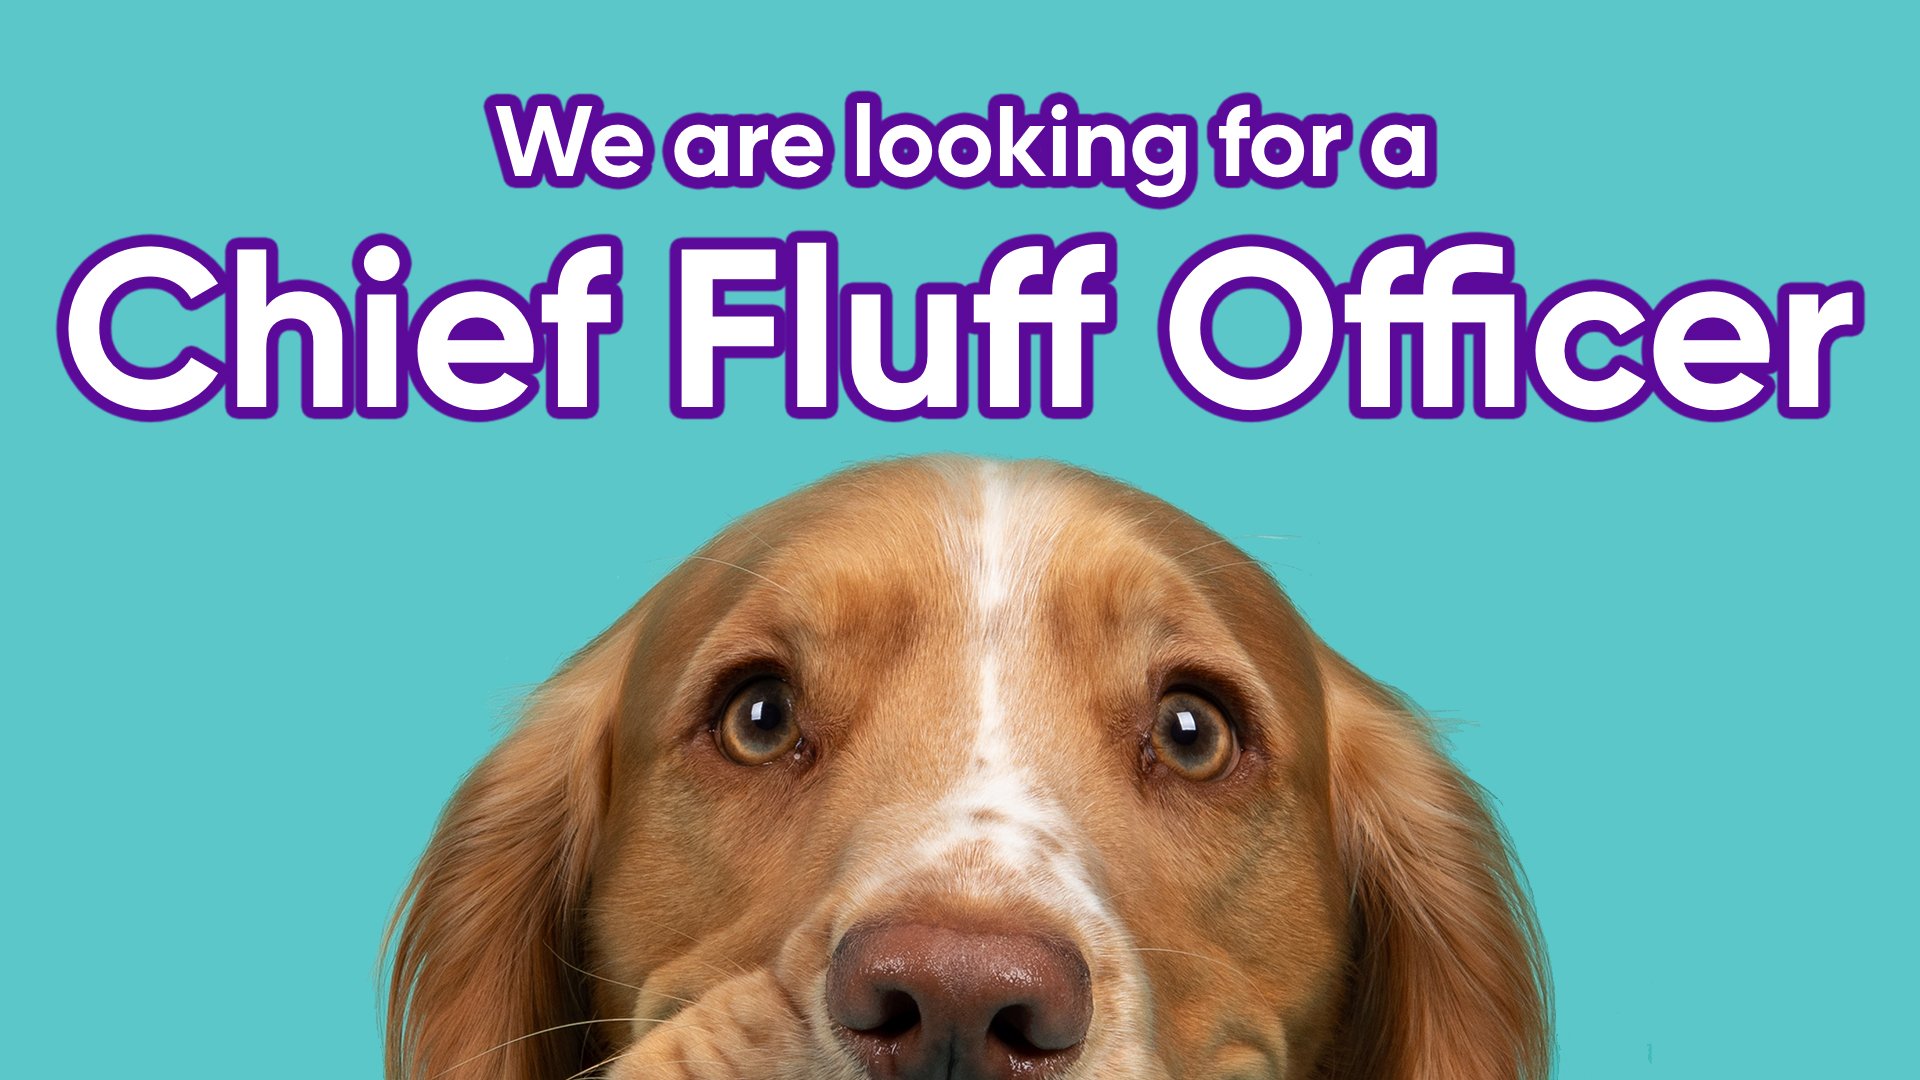 Wanted! Chief ‘Fluff’ Officer